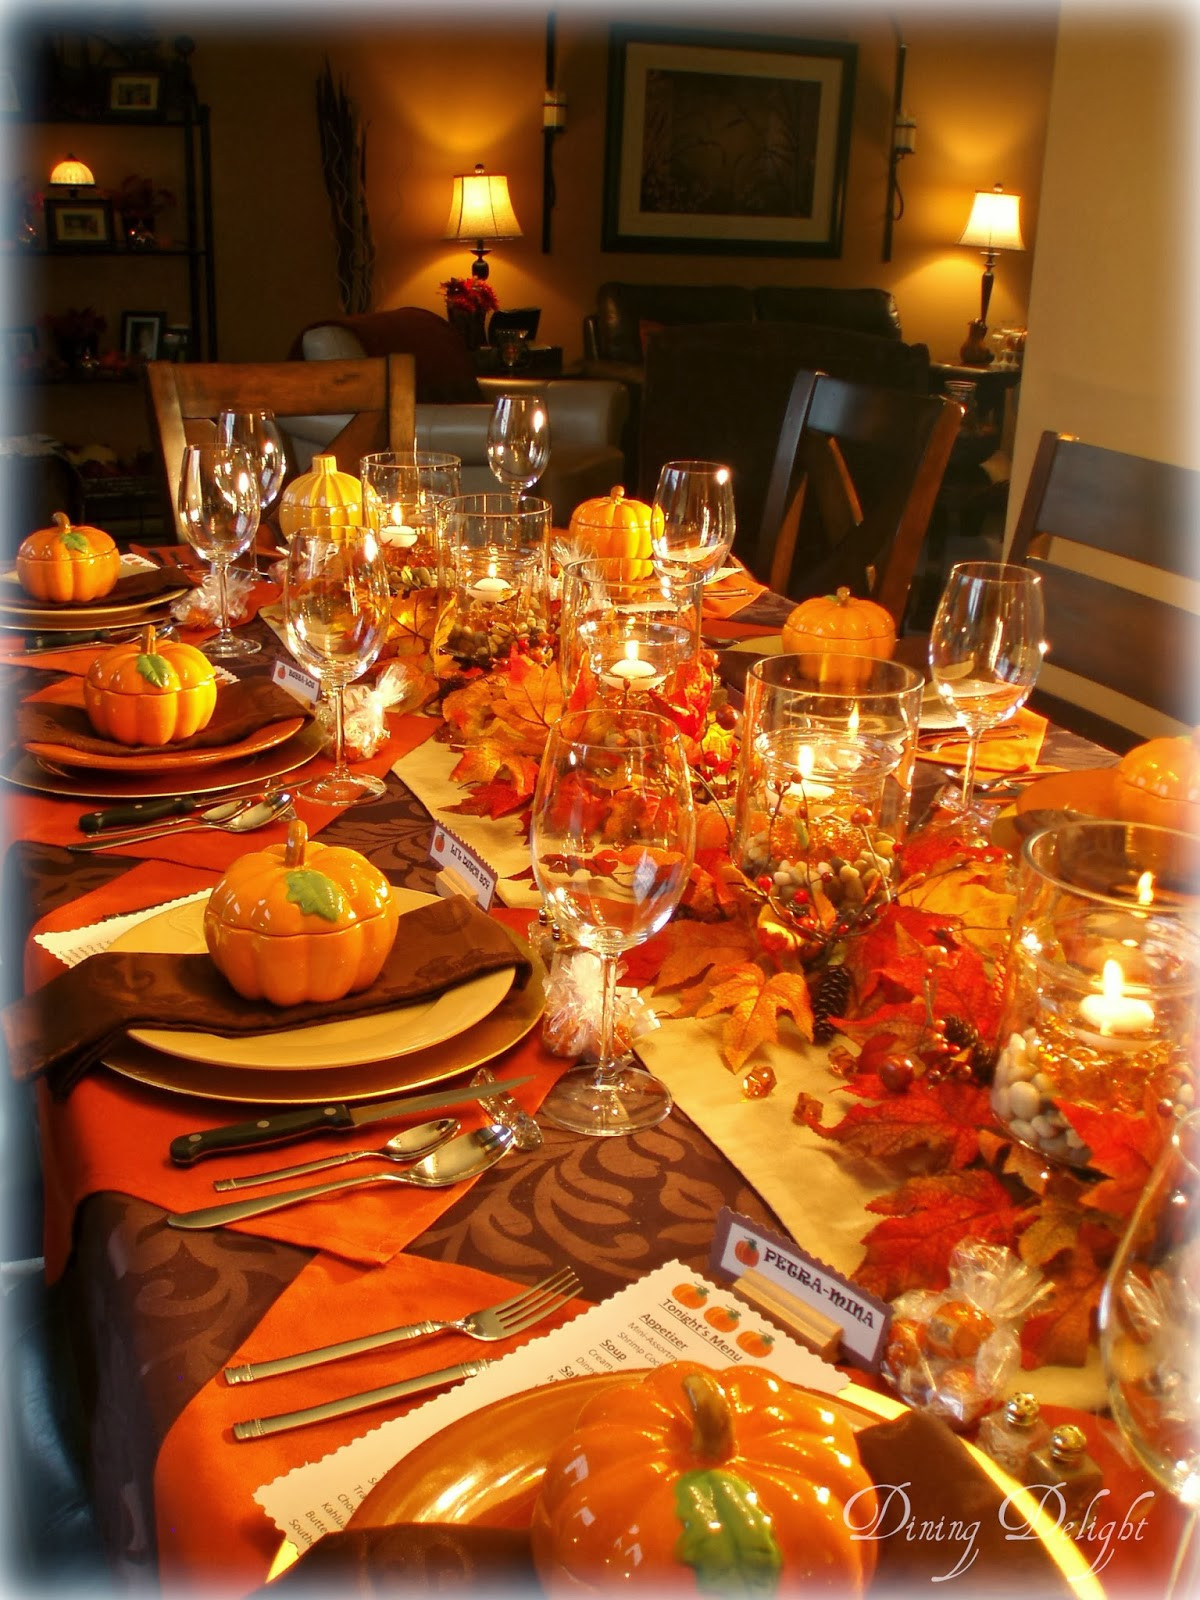 Ideas For A Dinner Party
 Dining Delight Fall Dinner Party for Ten